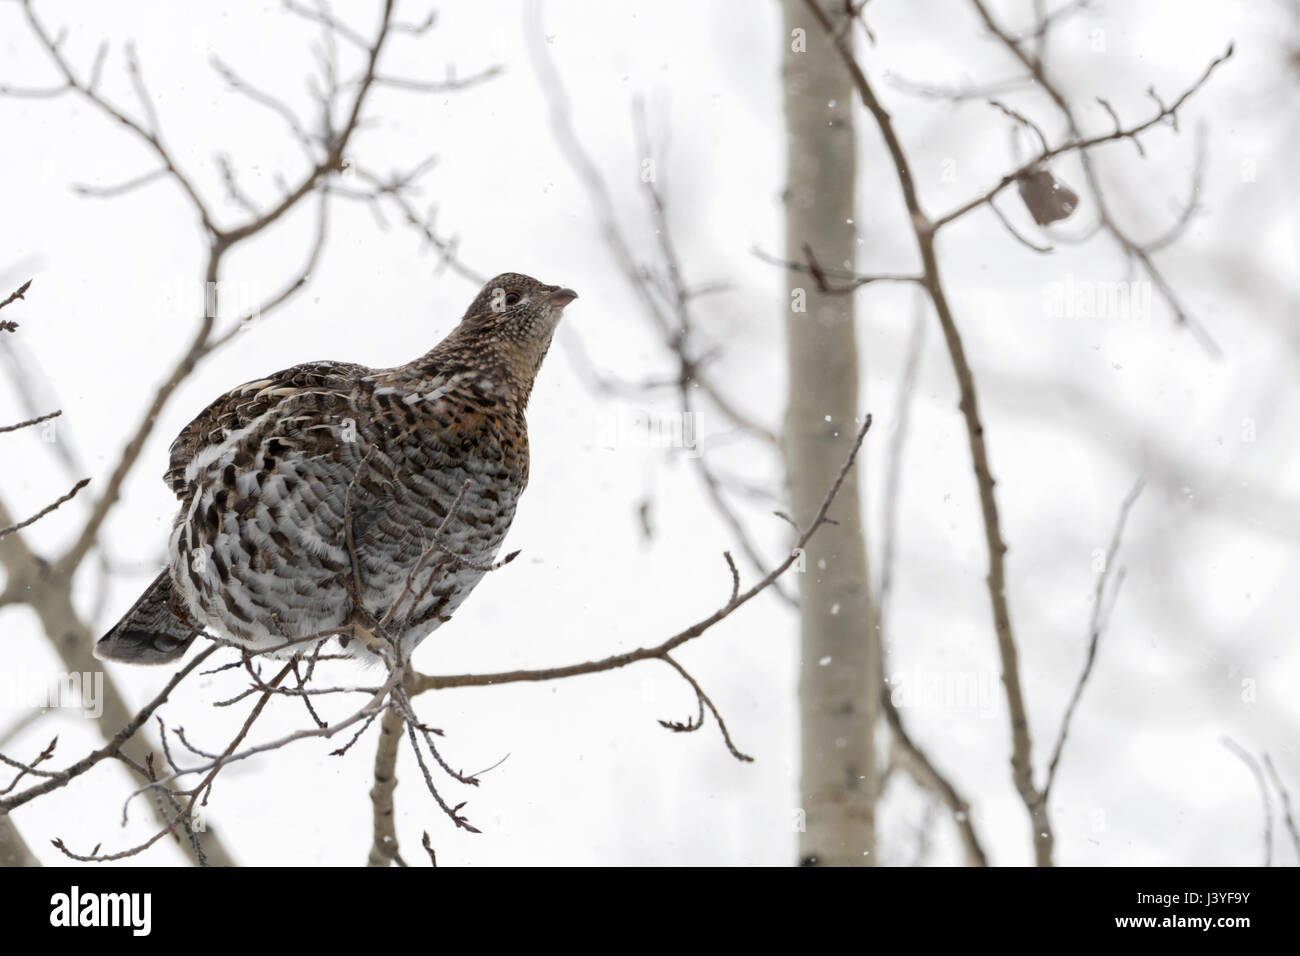 Ruffed Grouse / Kragenhuhn ( Bonasa umbellus ) in winter, perched in a tree, sitting on a thin branch, searching for food, during light snowfall, USA. Stock Photo